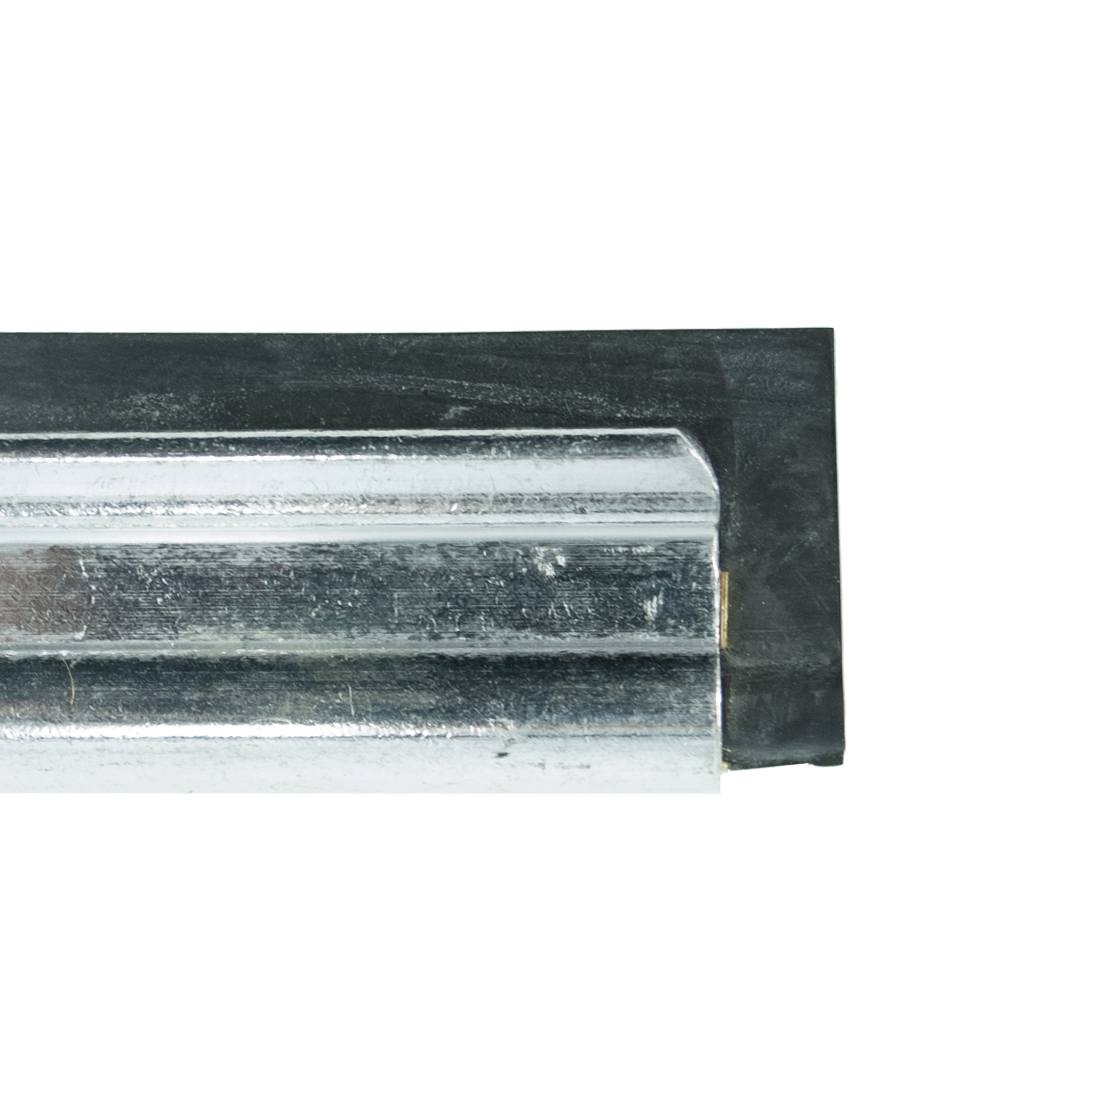 Ettore Aluminum Squeegee Channel Close Up View